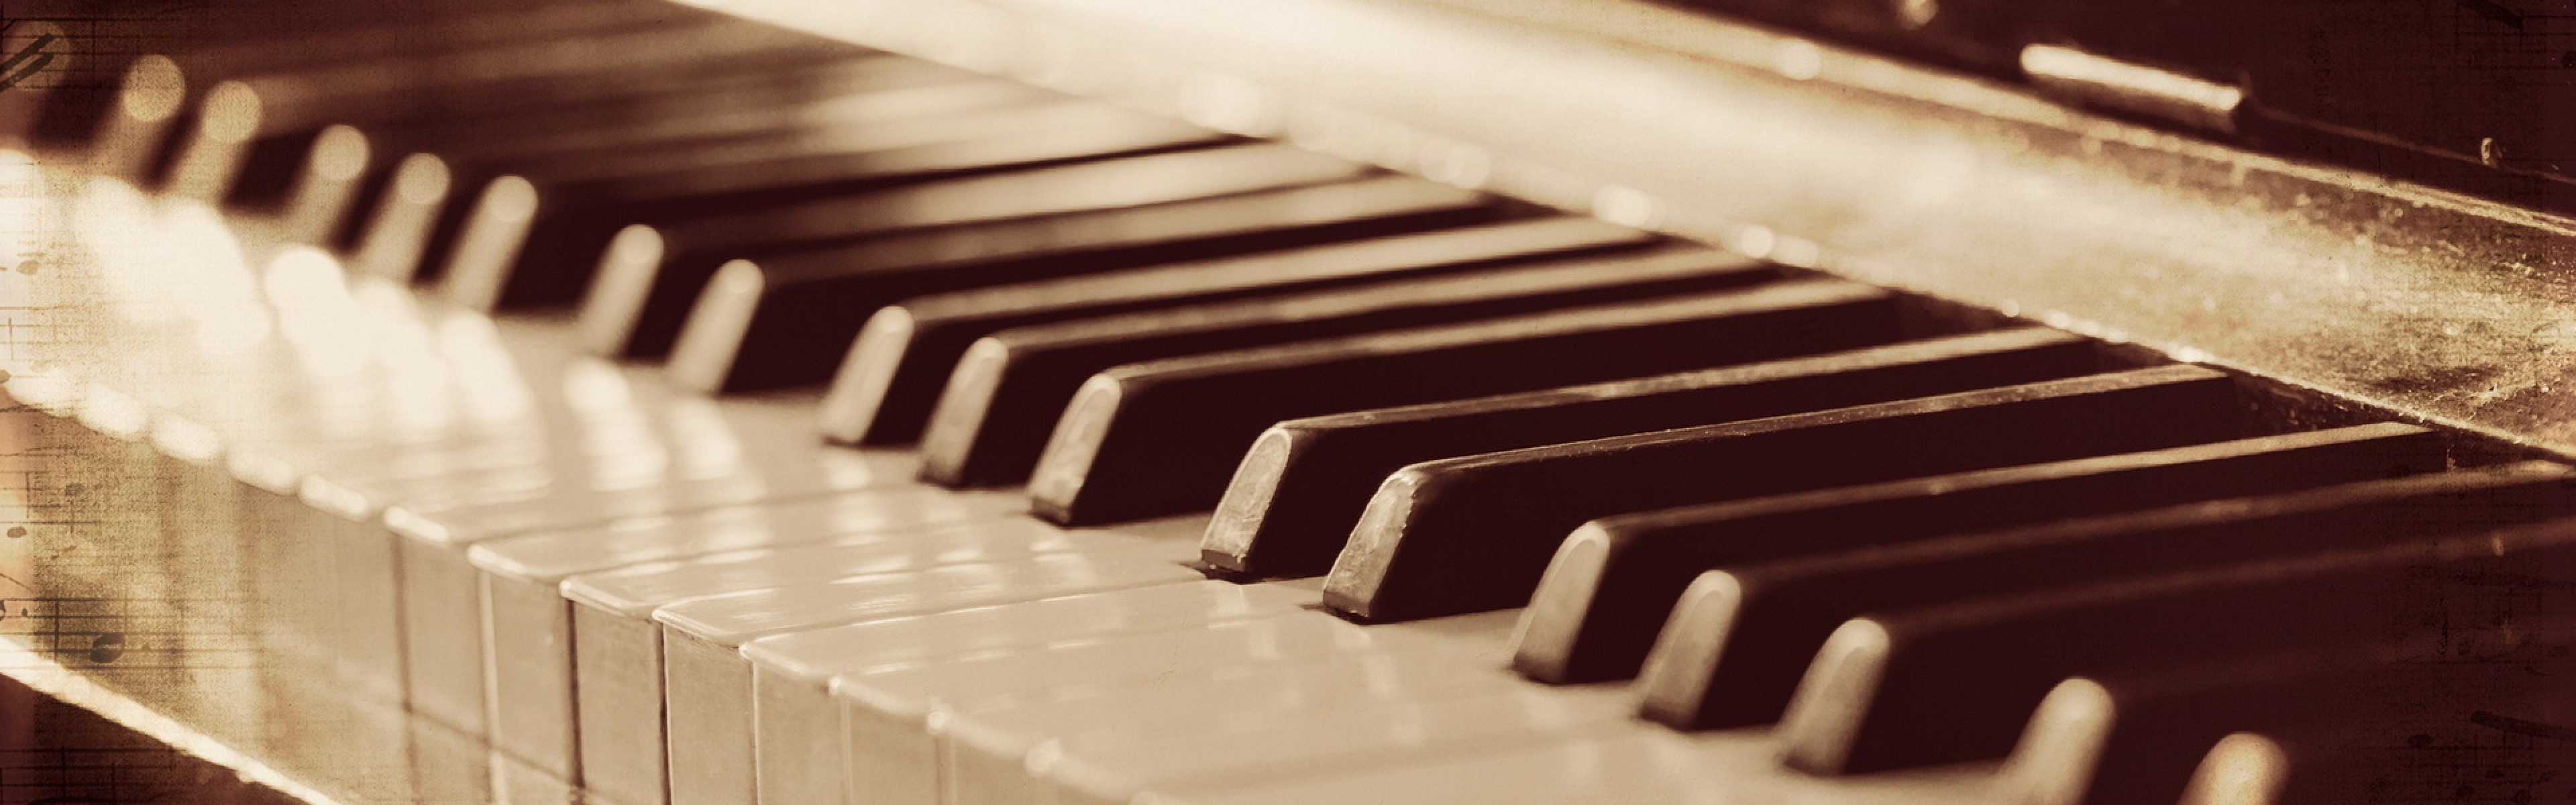 3840x1200 Wallpaper piano, music, background, style